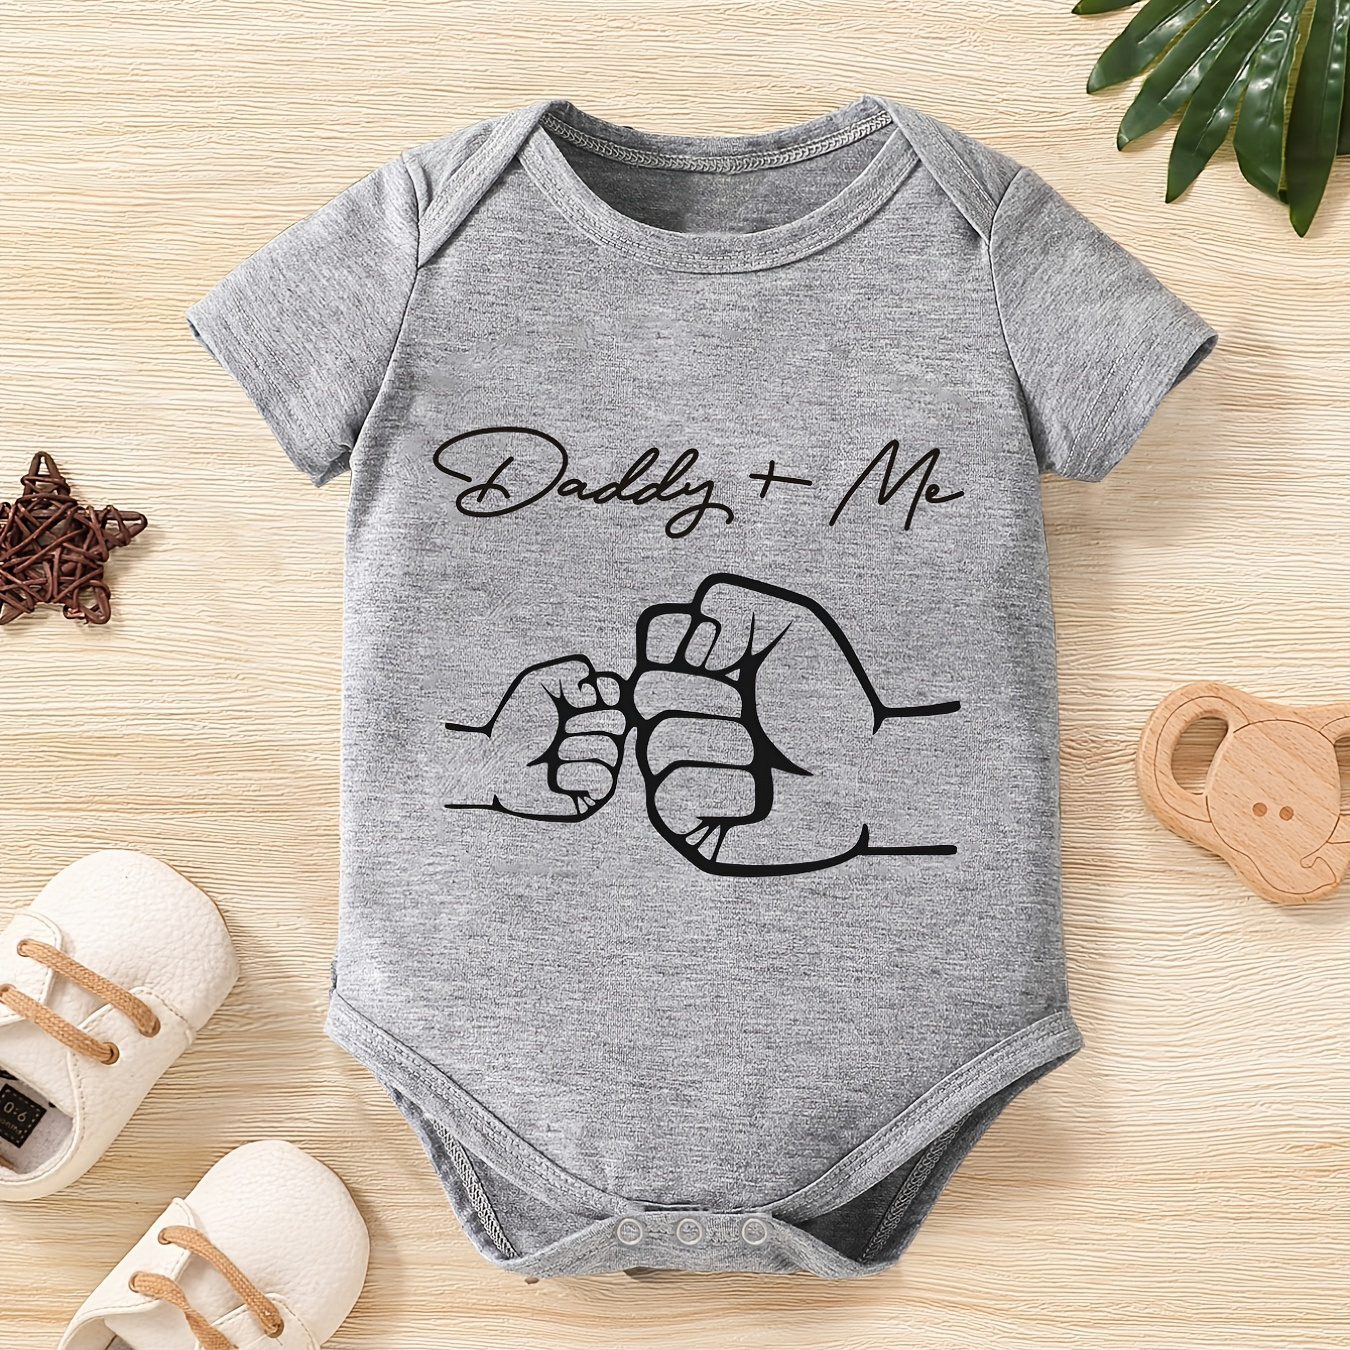 

Baby Boys Casual "daddy+me" Print Romper, Short Sleeve Crew Neck Bodysuit For Summer